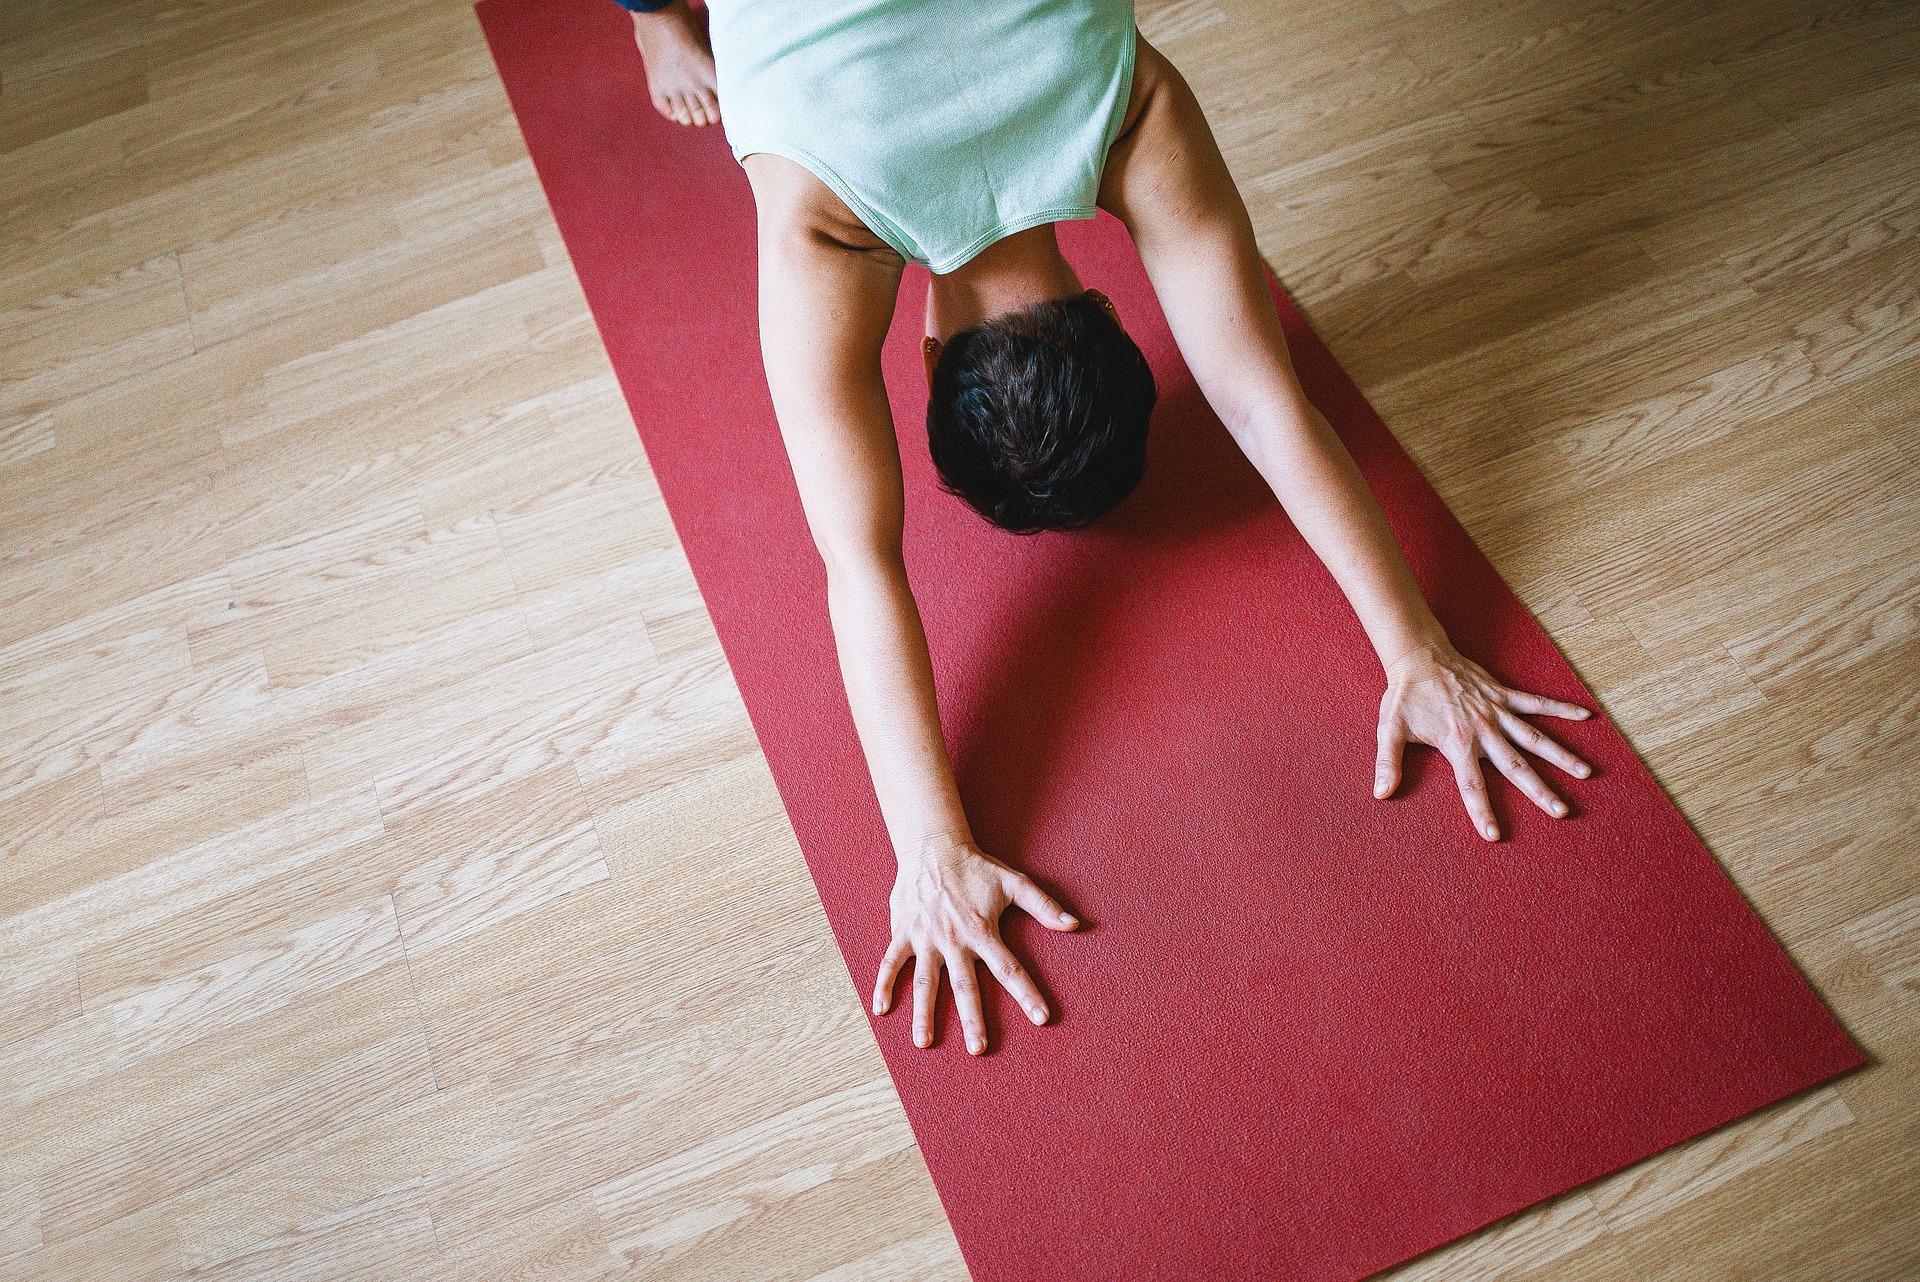 Want To Last Three Times Longer In Bed? Scientists Say Try Yoga